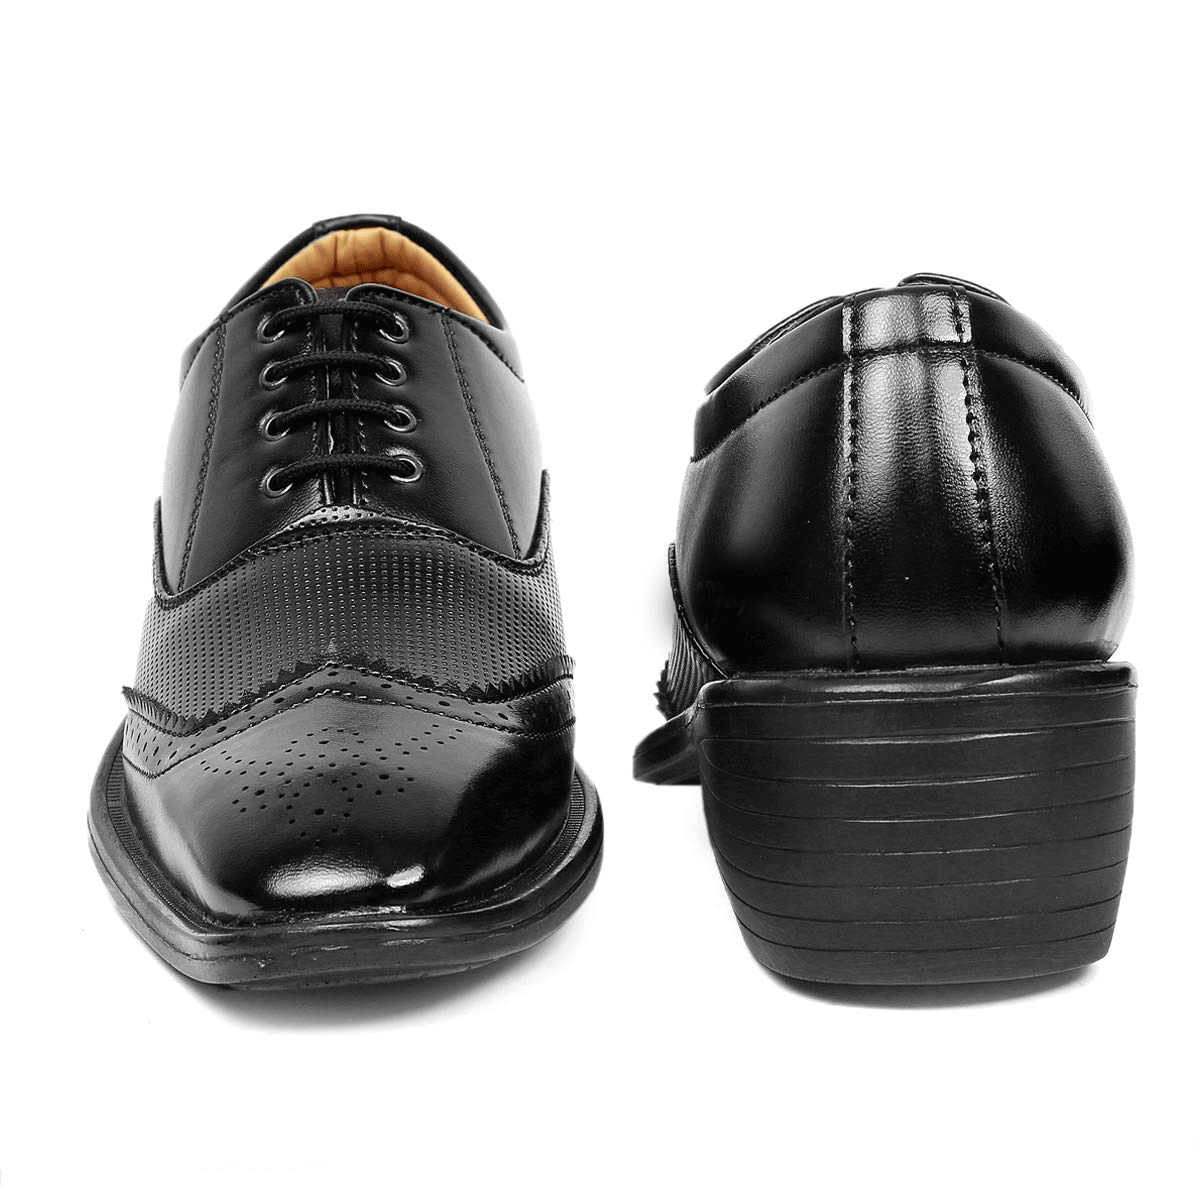 Height Increasing Black Casual And Formal Lace-Up Shoes For Men-Unique and Classy